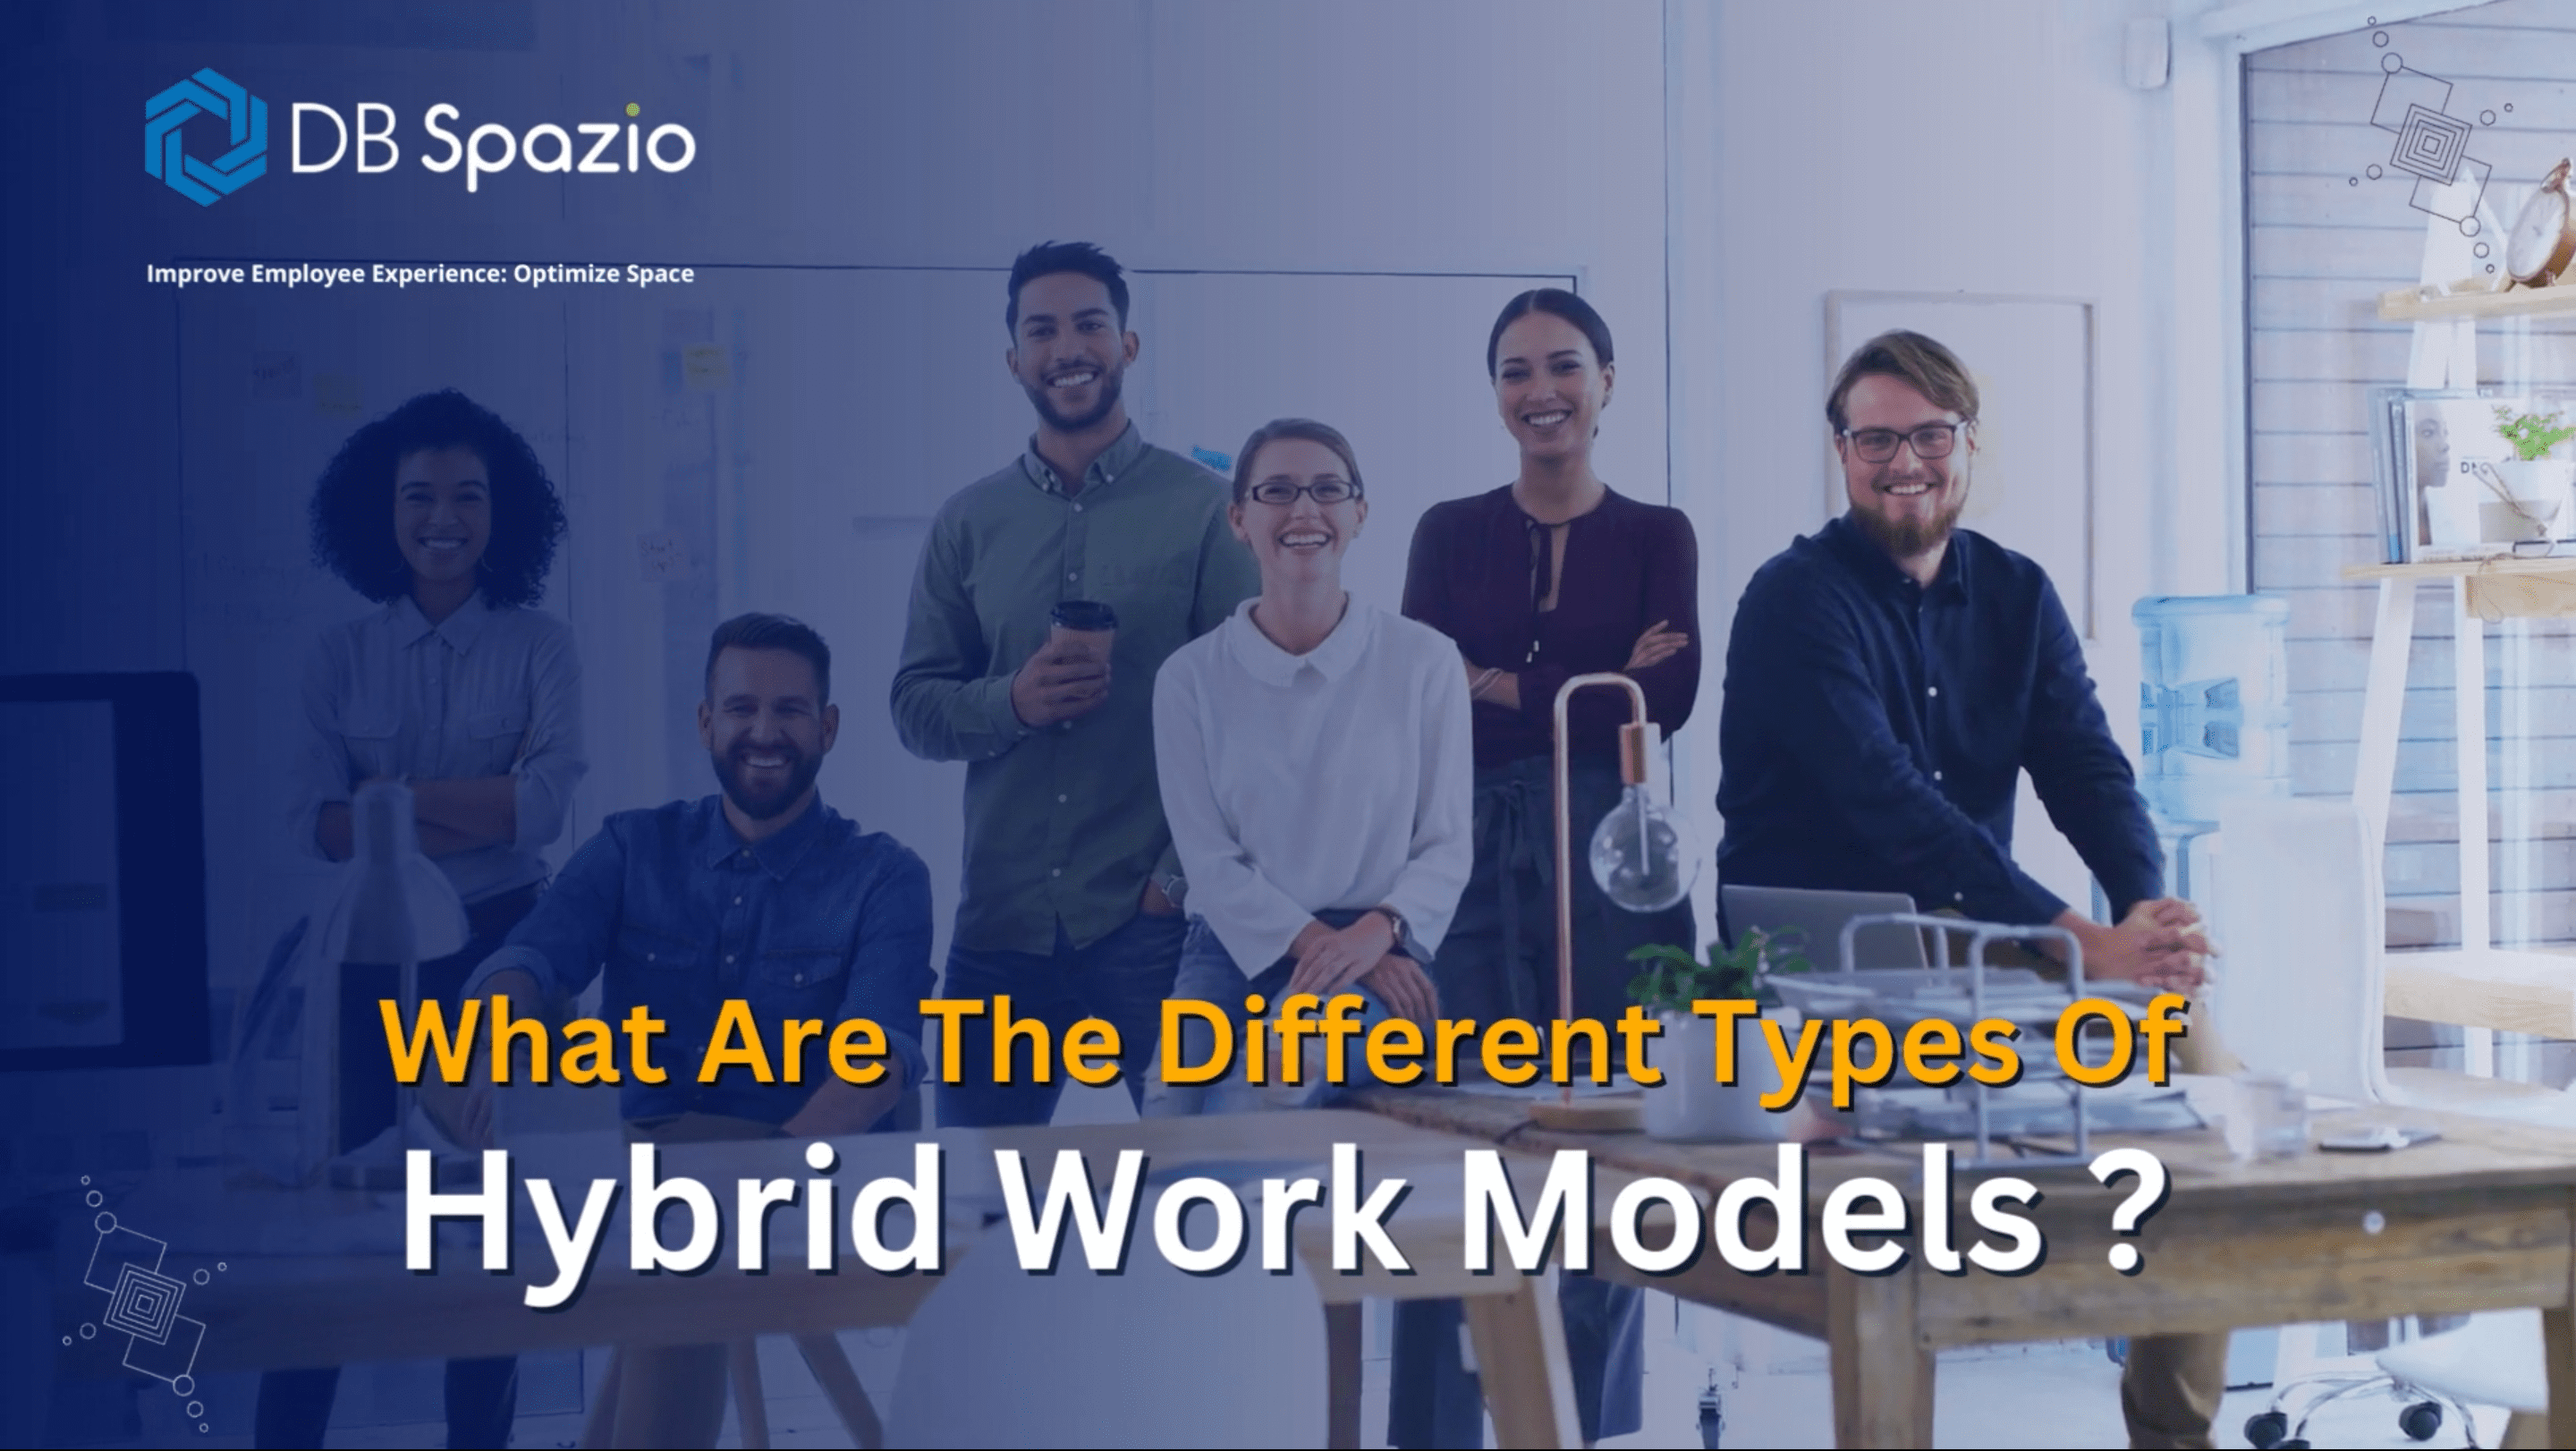 The image is a thumbnail for a video that explains the different hybrid work model, its pros and cons and the technology required for each model.